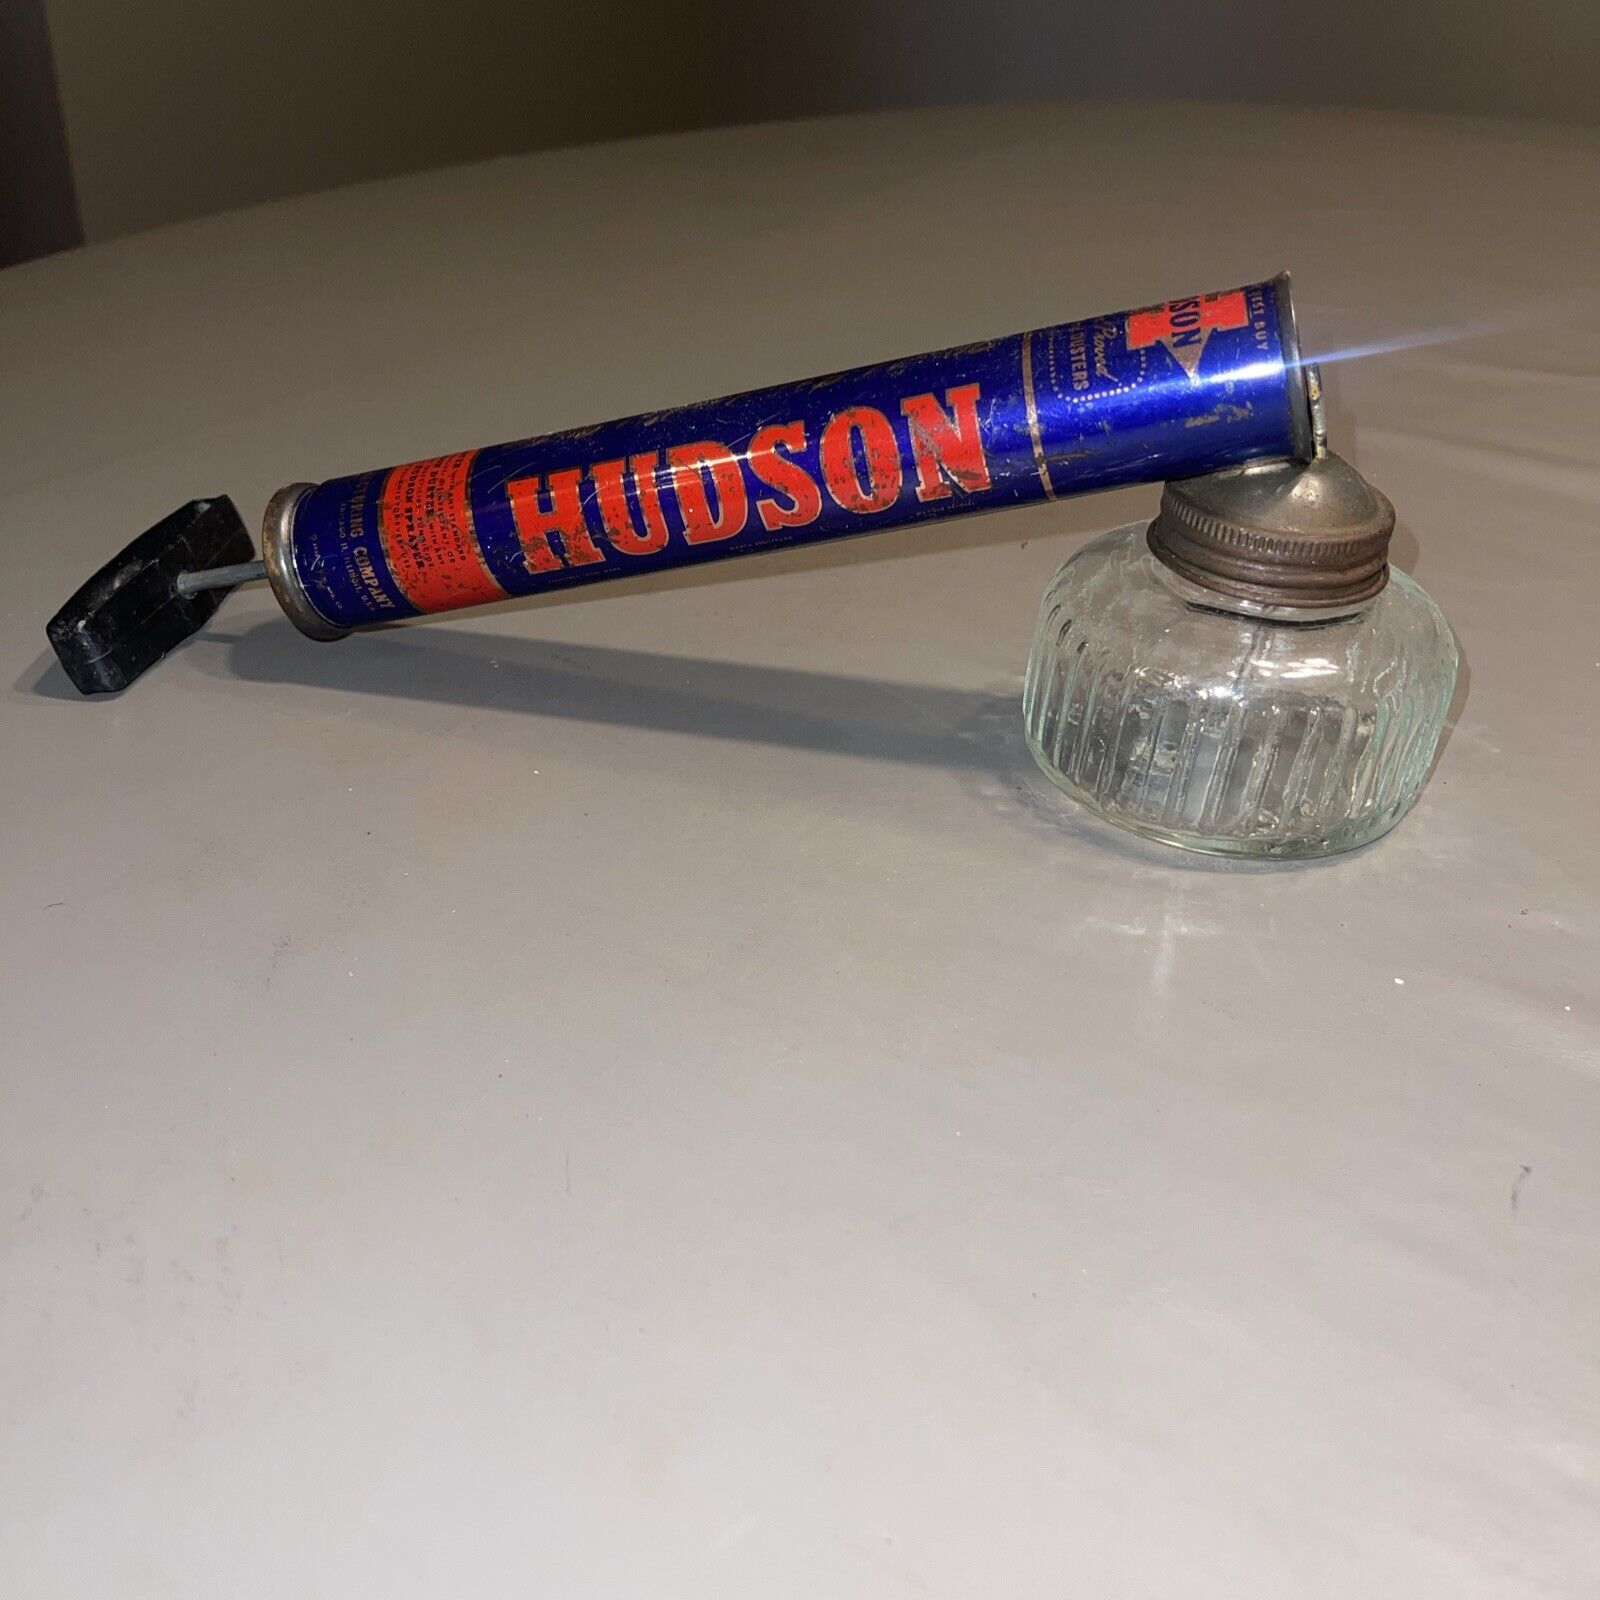 1960s Vintage Hudson Hand Sprayer Pesticide Duster with Clear Glass Canister